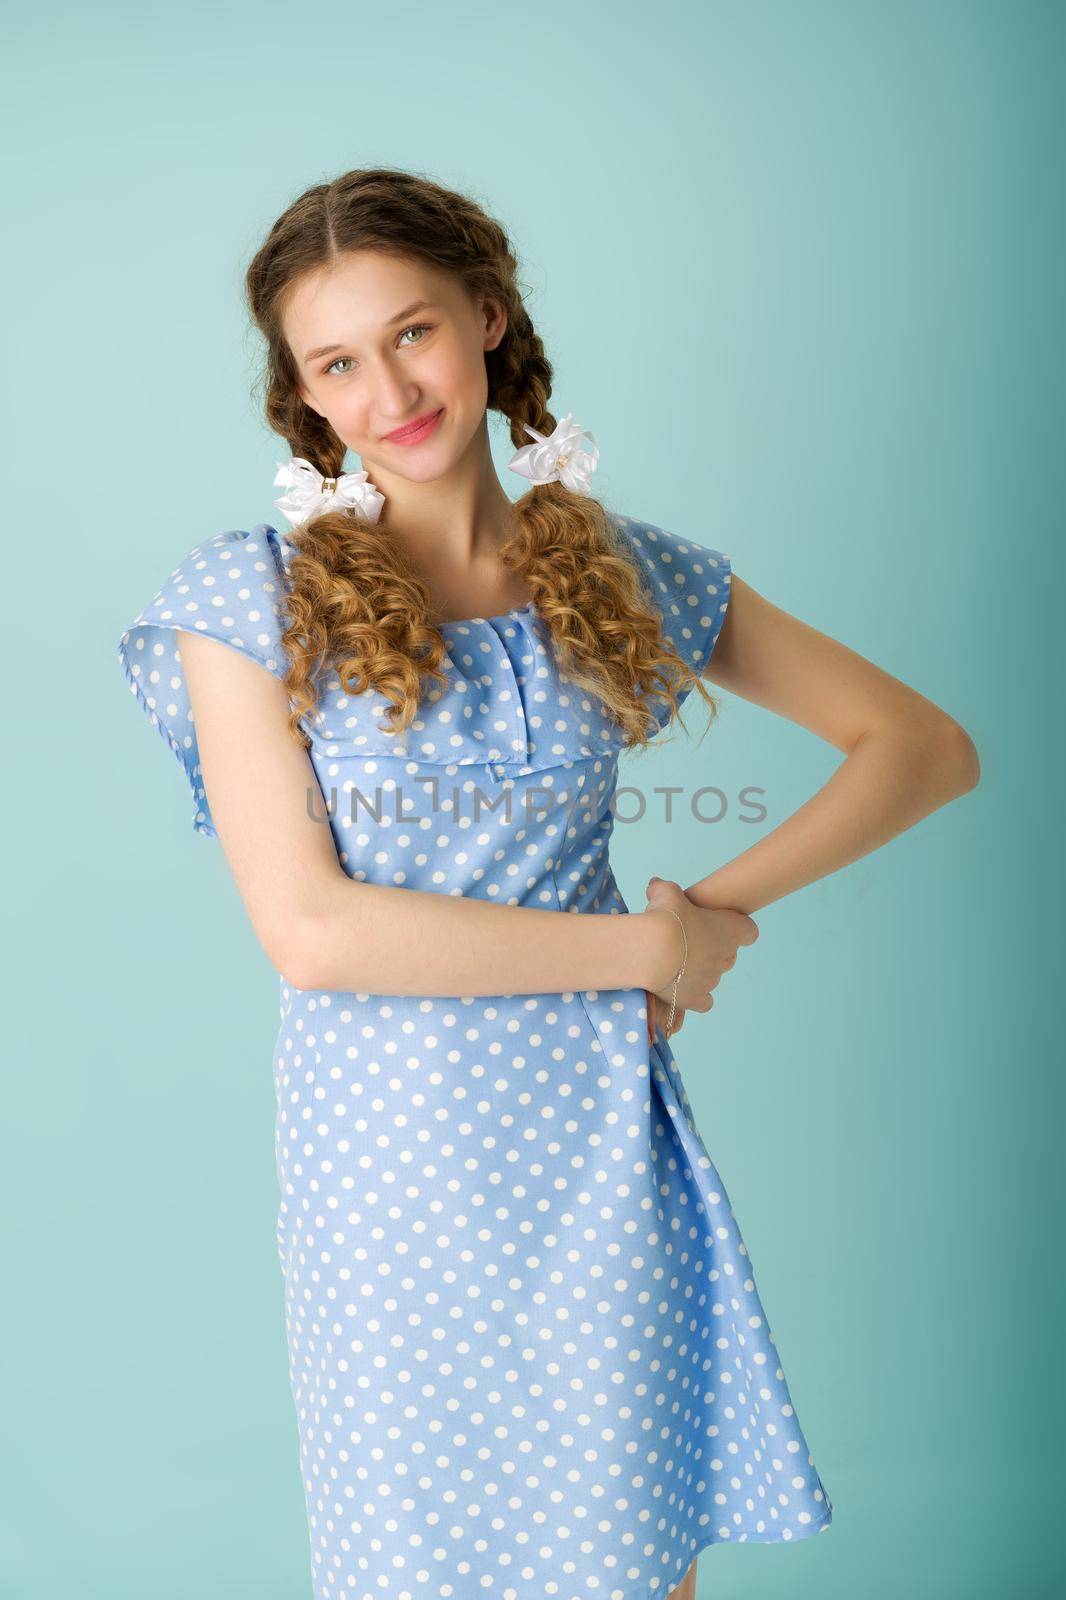 Portrait of a cheerful teenage girl in a blue dress. Happy girl in polka dot dress looking up with positive facial expression over isolated blue background.close-up